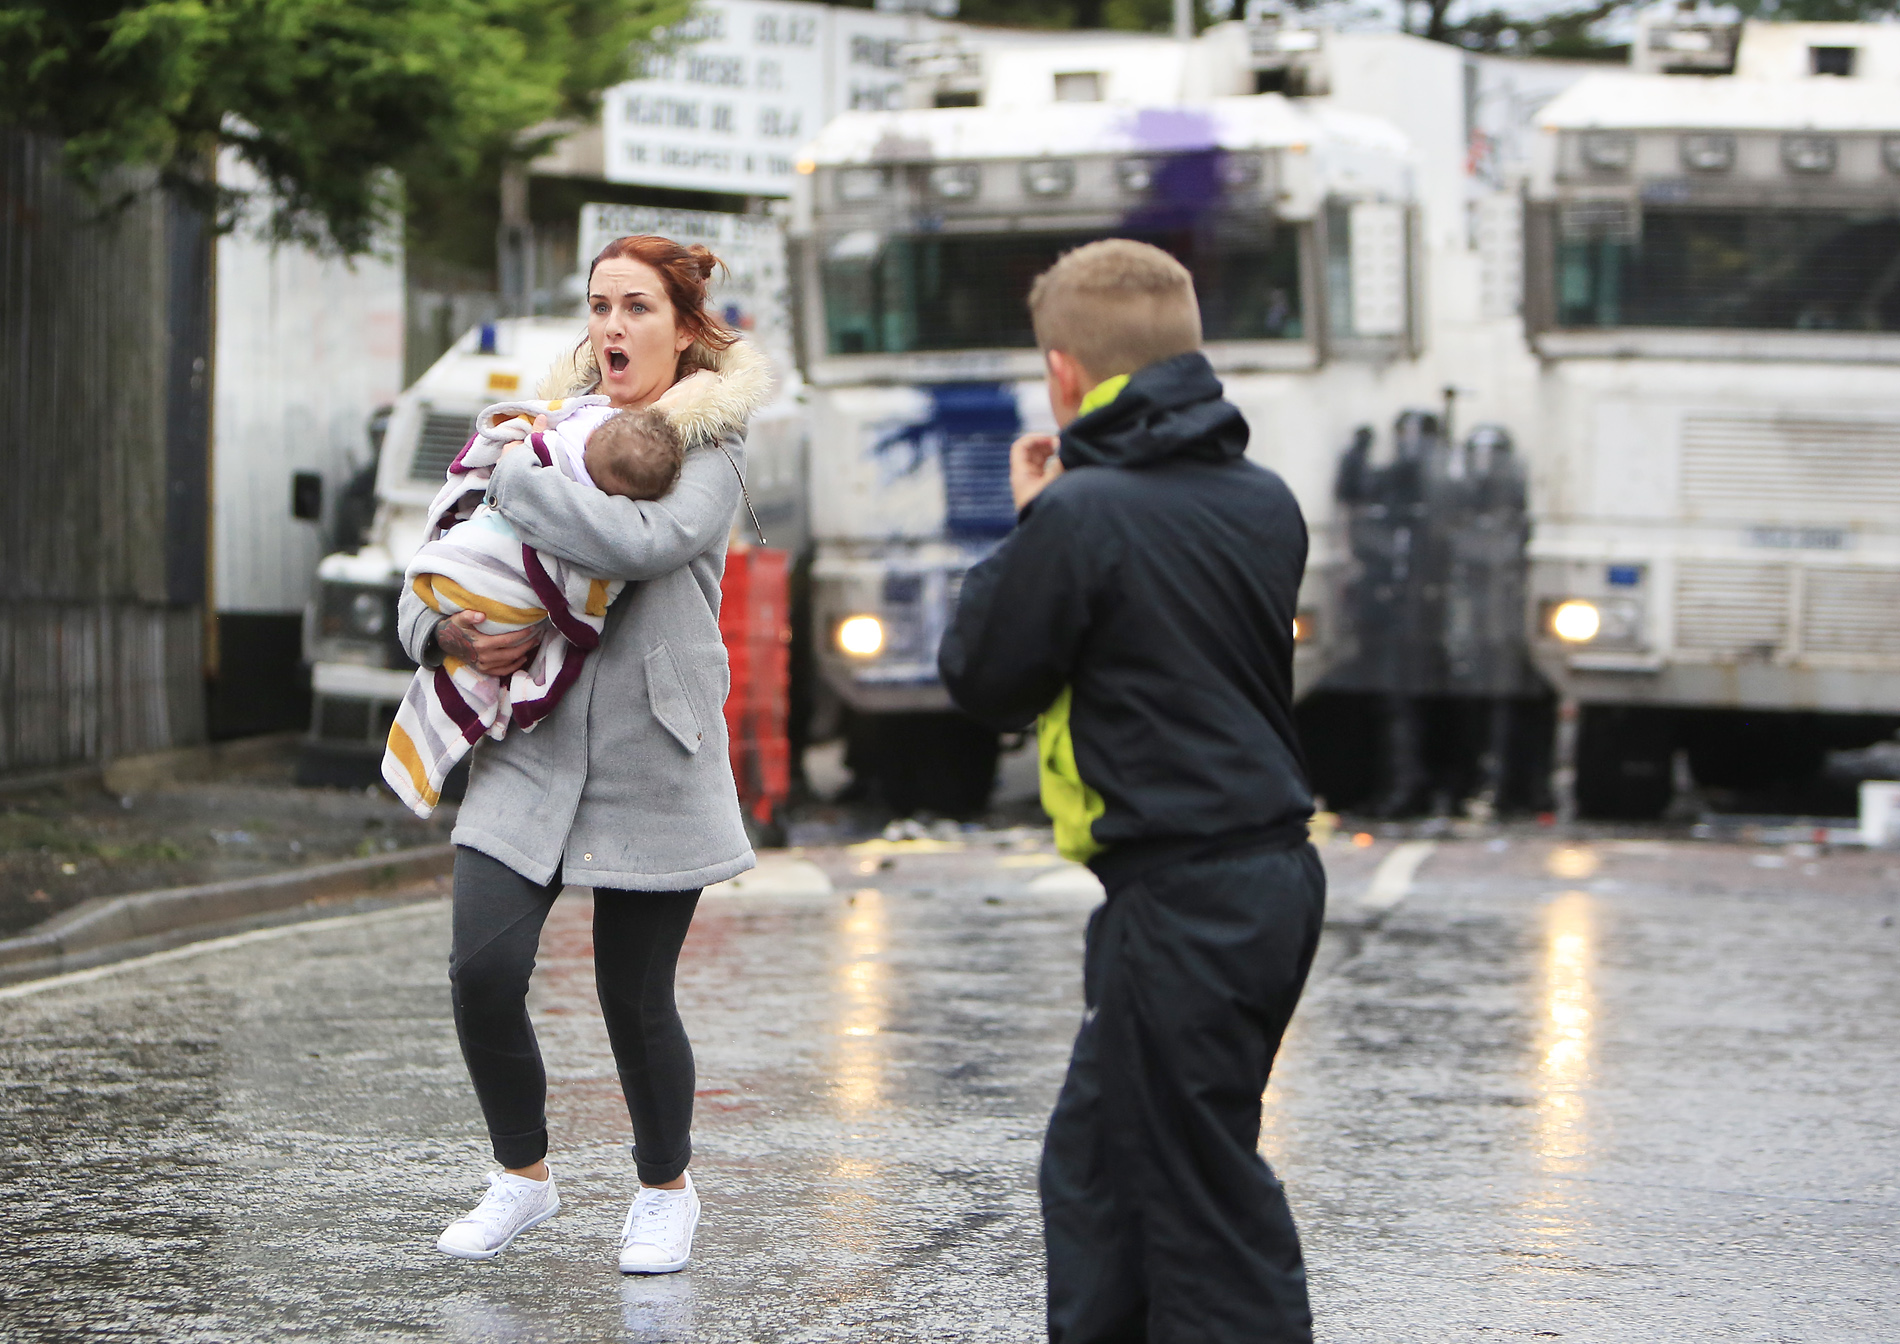 A distressed young mother attempts to make her way to safety with her baby during trouble in North Belfast 